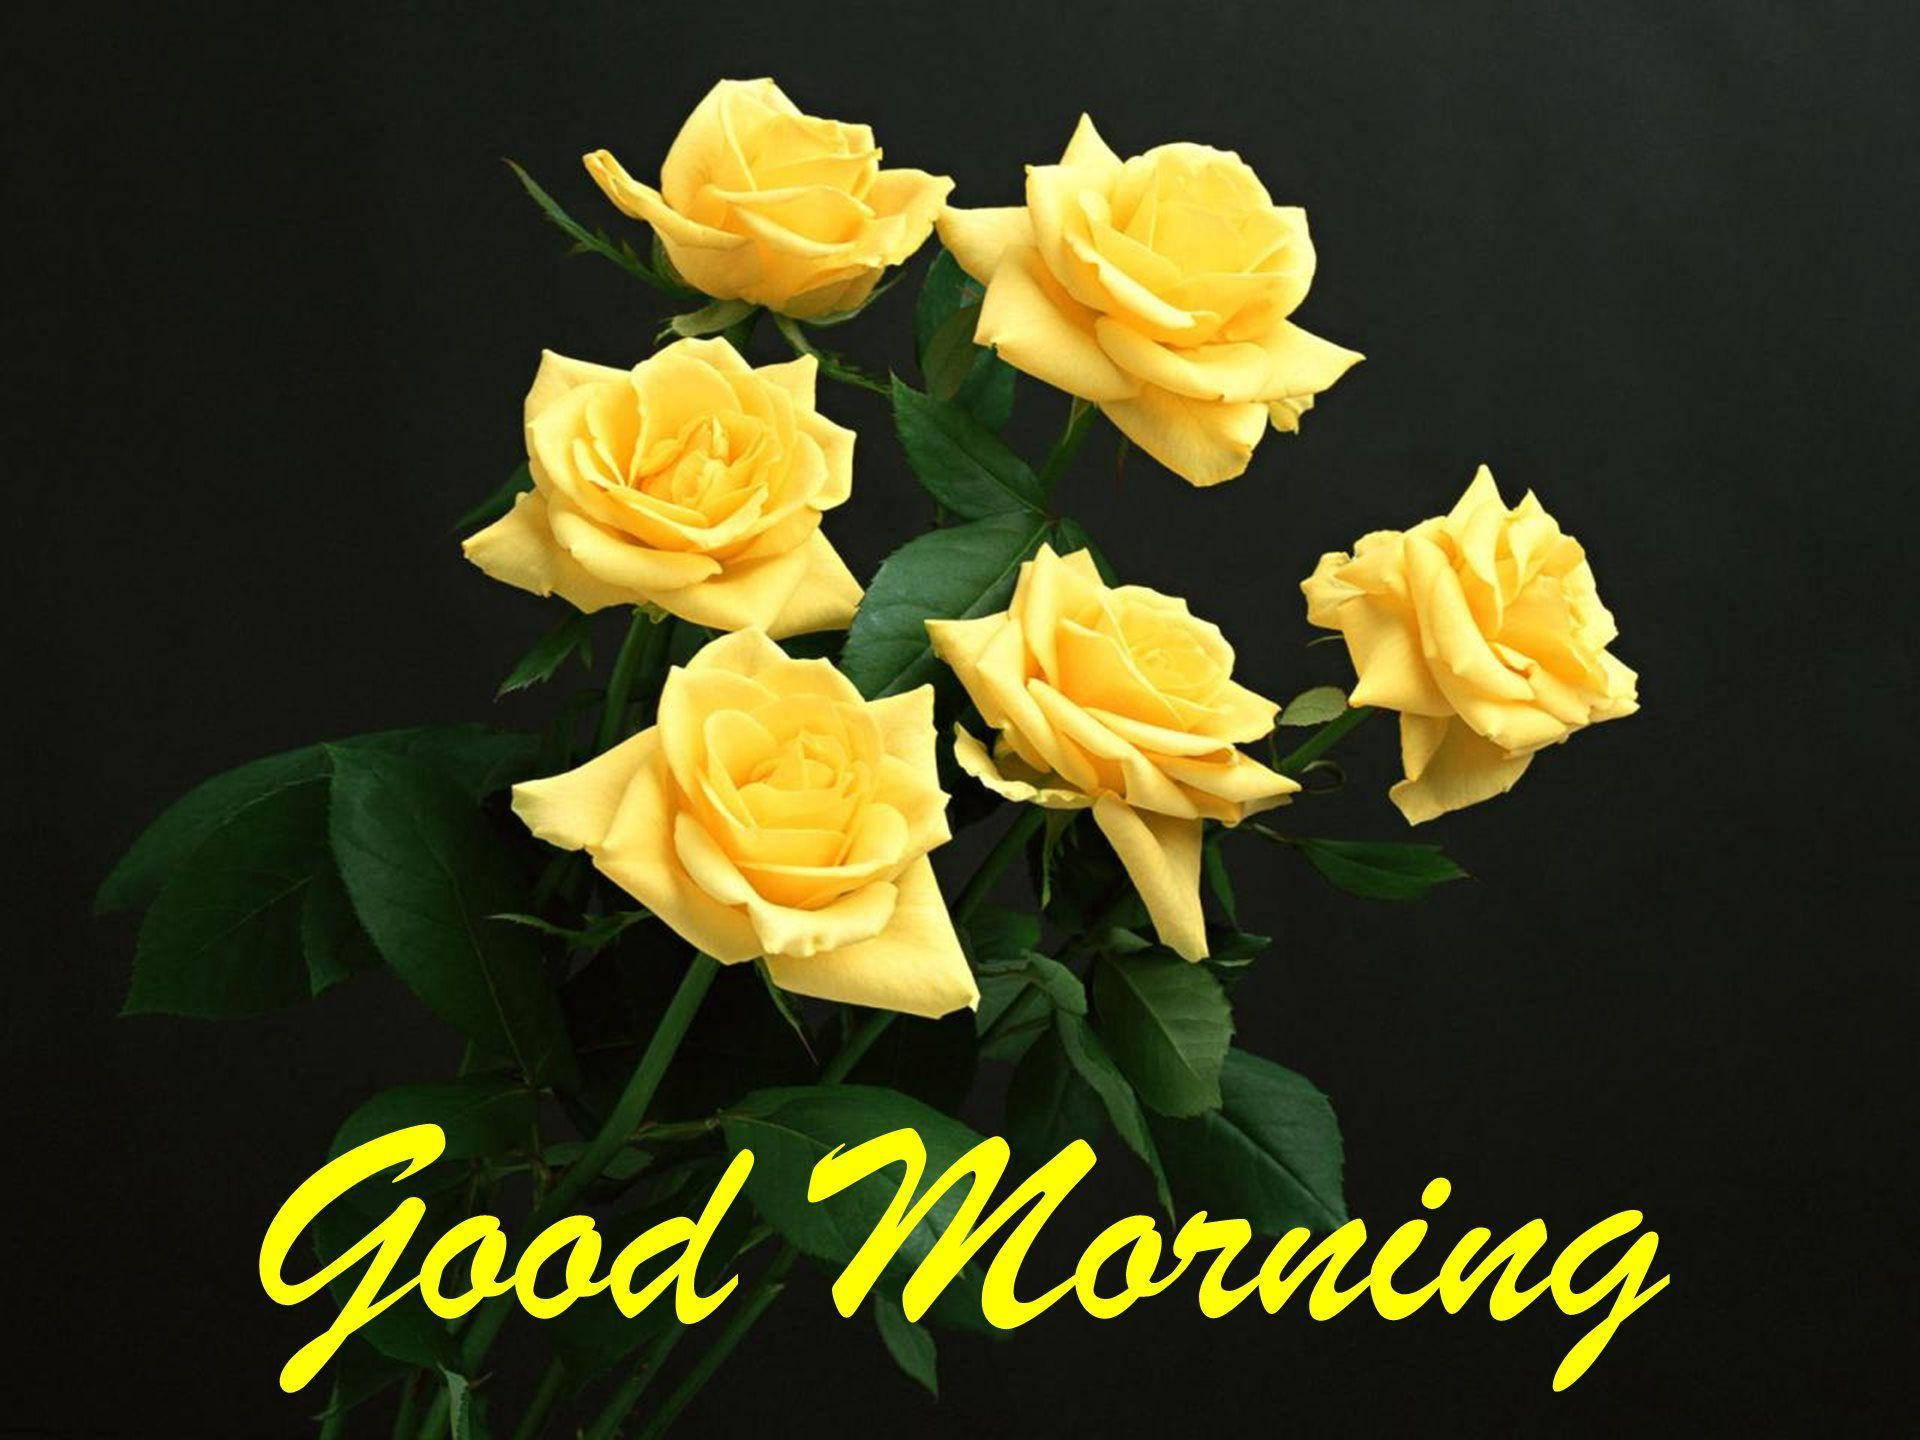 Good Morning Hd With Yellow Roses